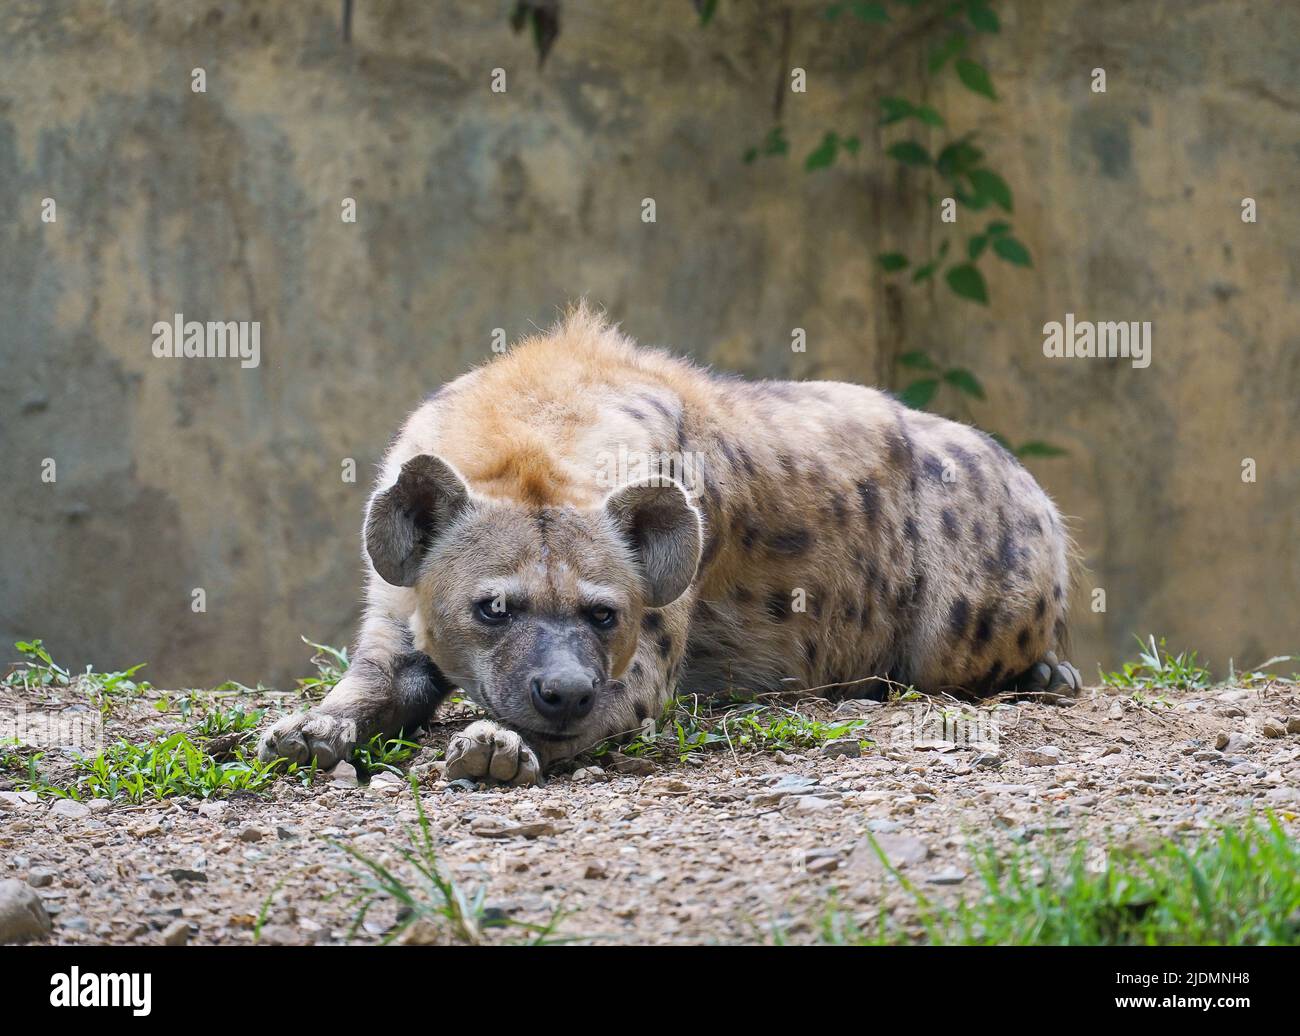 Adult spotted hyena at zoo Stock Photo